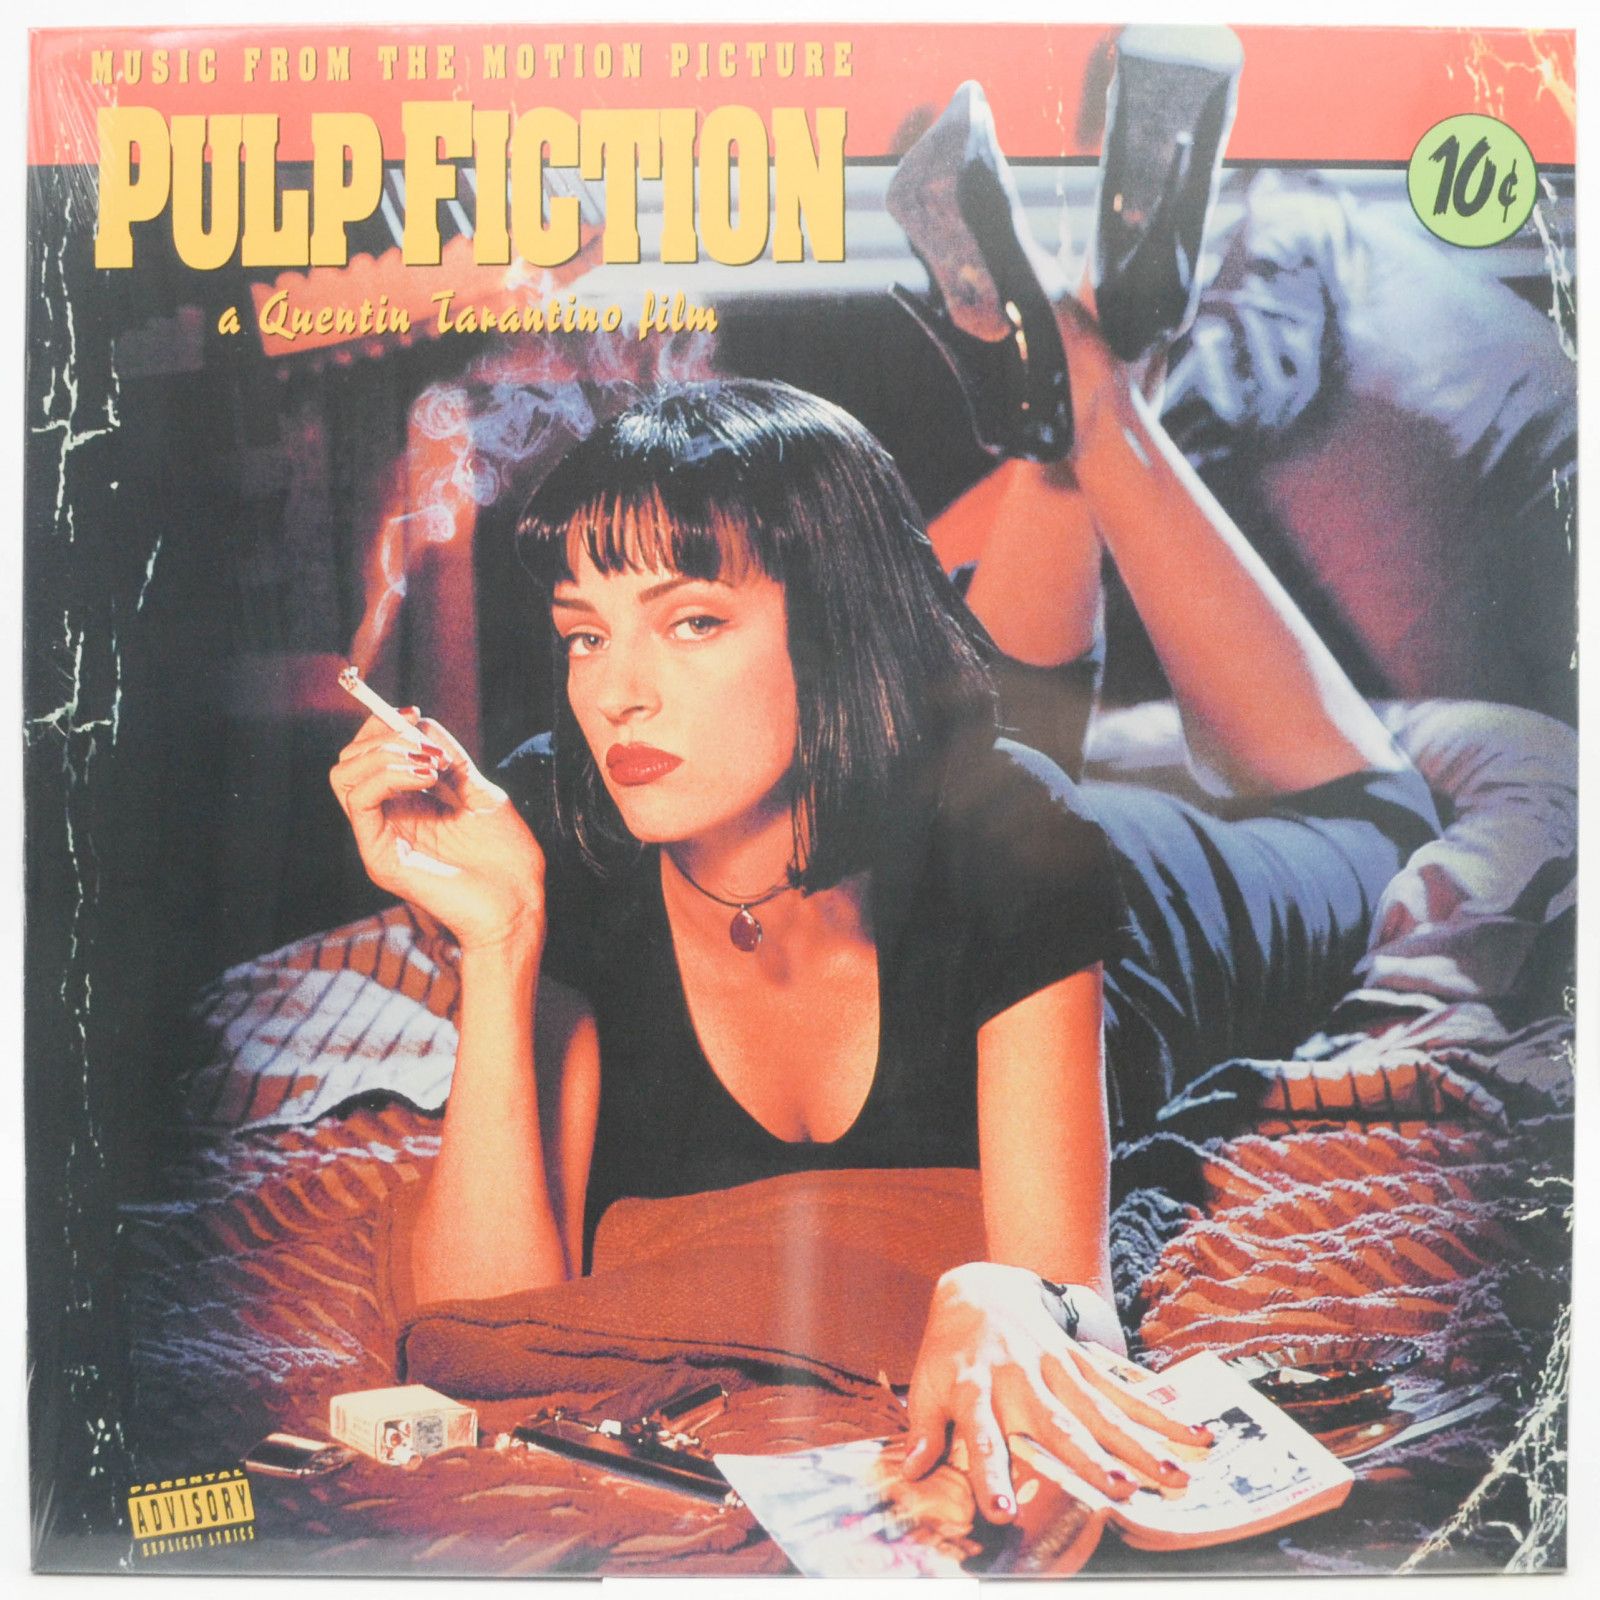 Various — Pulp Fiction (Music From The Motion Picture), 1992